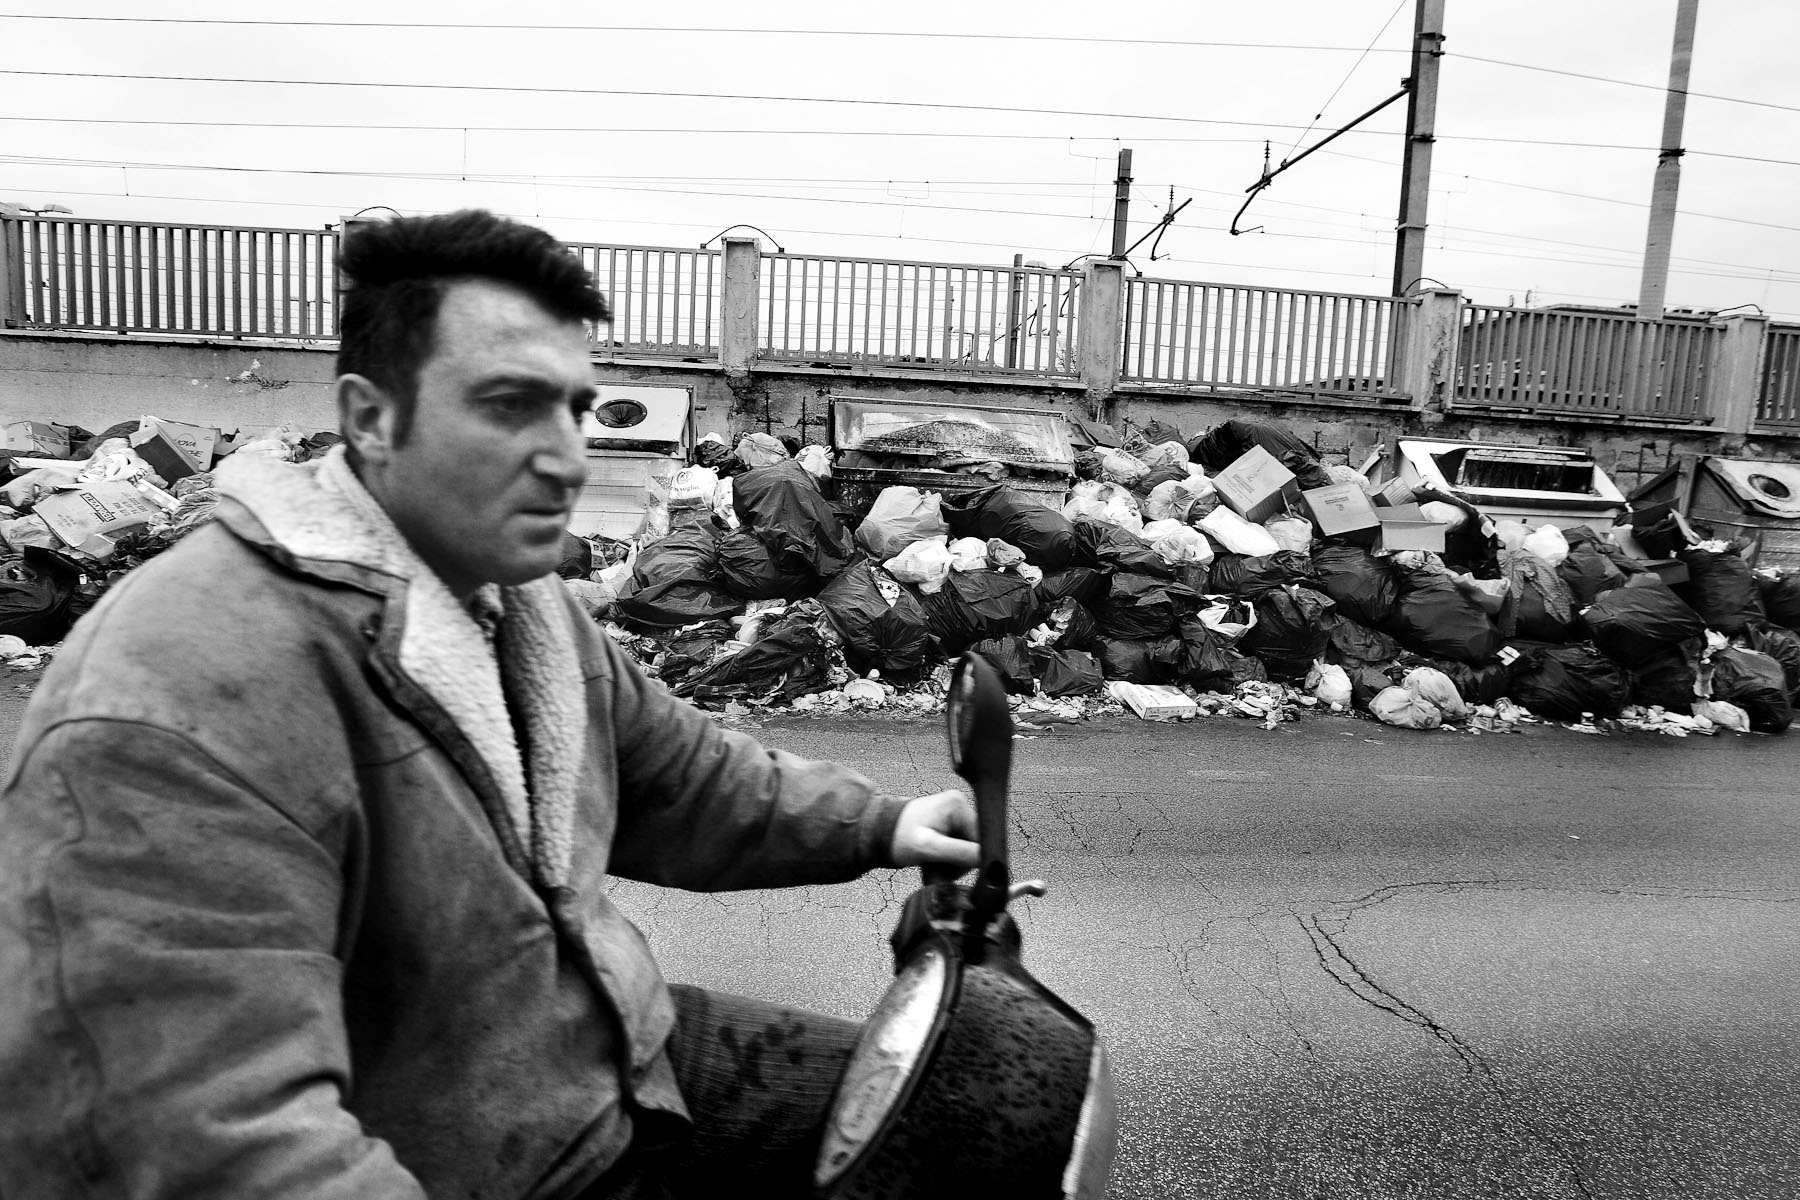 A man rides a motorcycle down a street full of garbage in Caserta, the outskirts of Naples, Italy, on February 21, 2008.